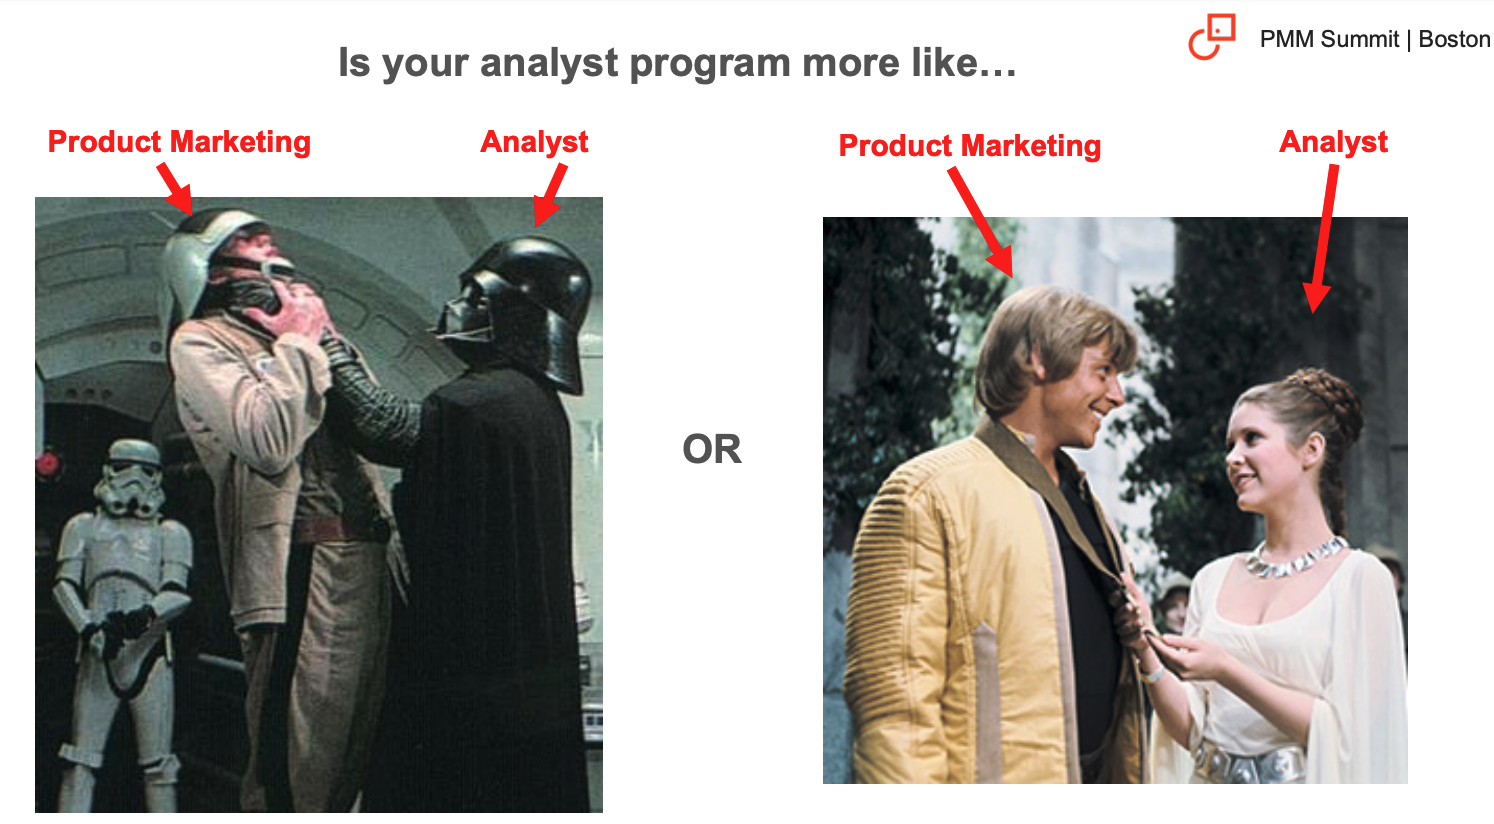 What does your analyst program look like? Luke Skywalker and Darth Vader or Luke and Leia?